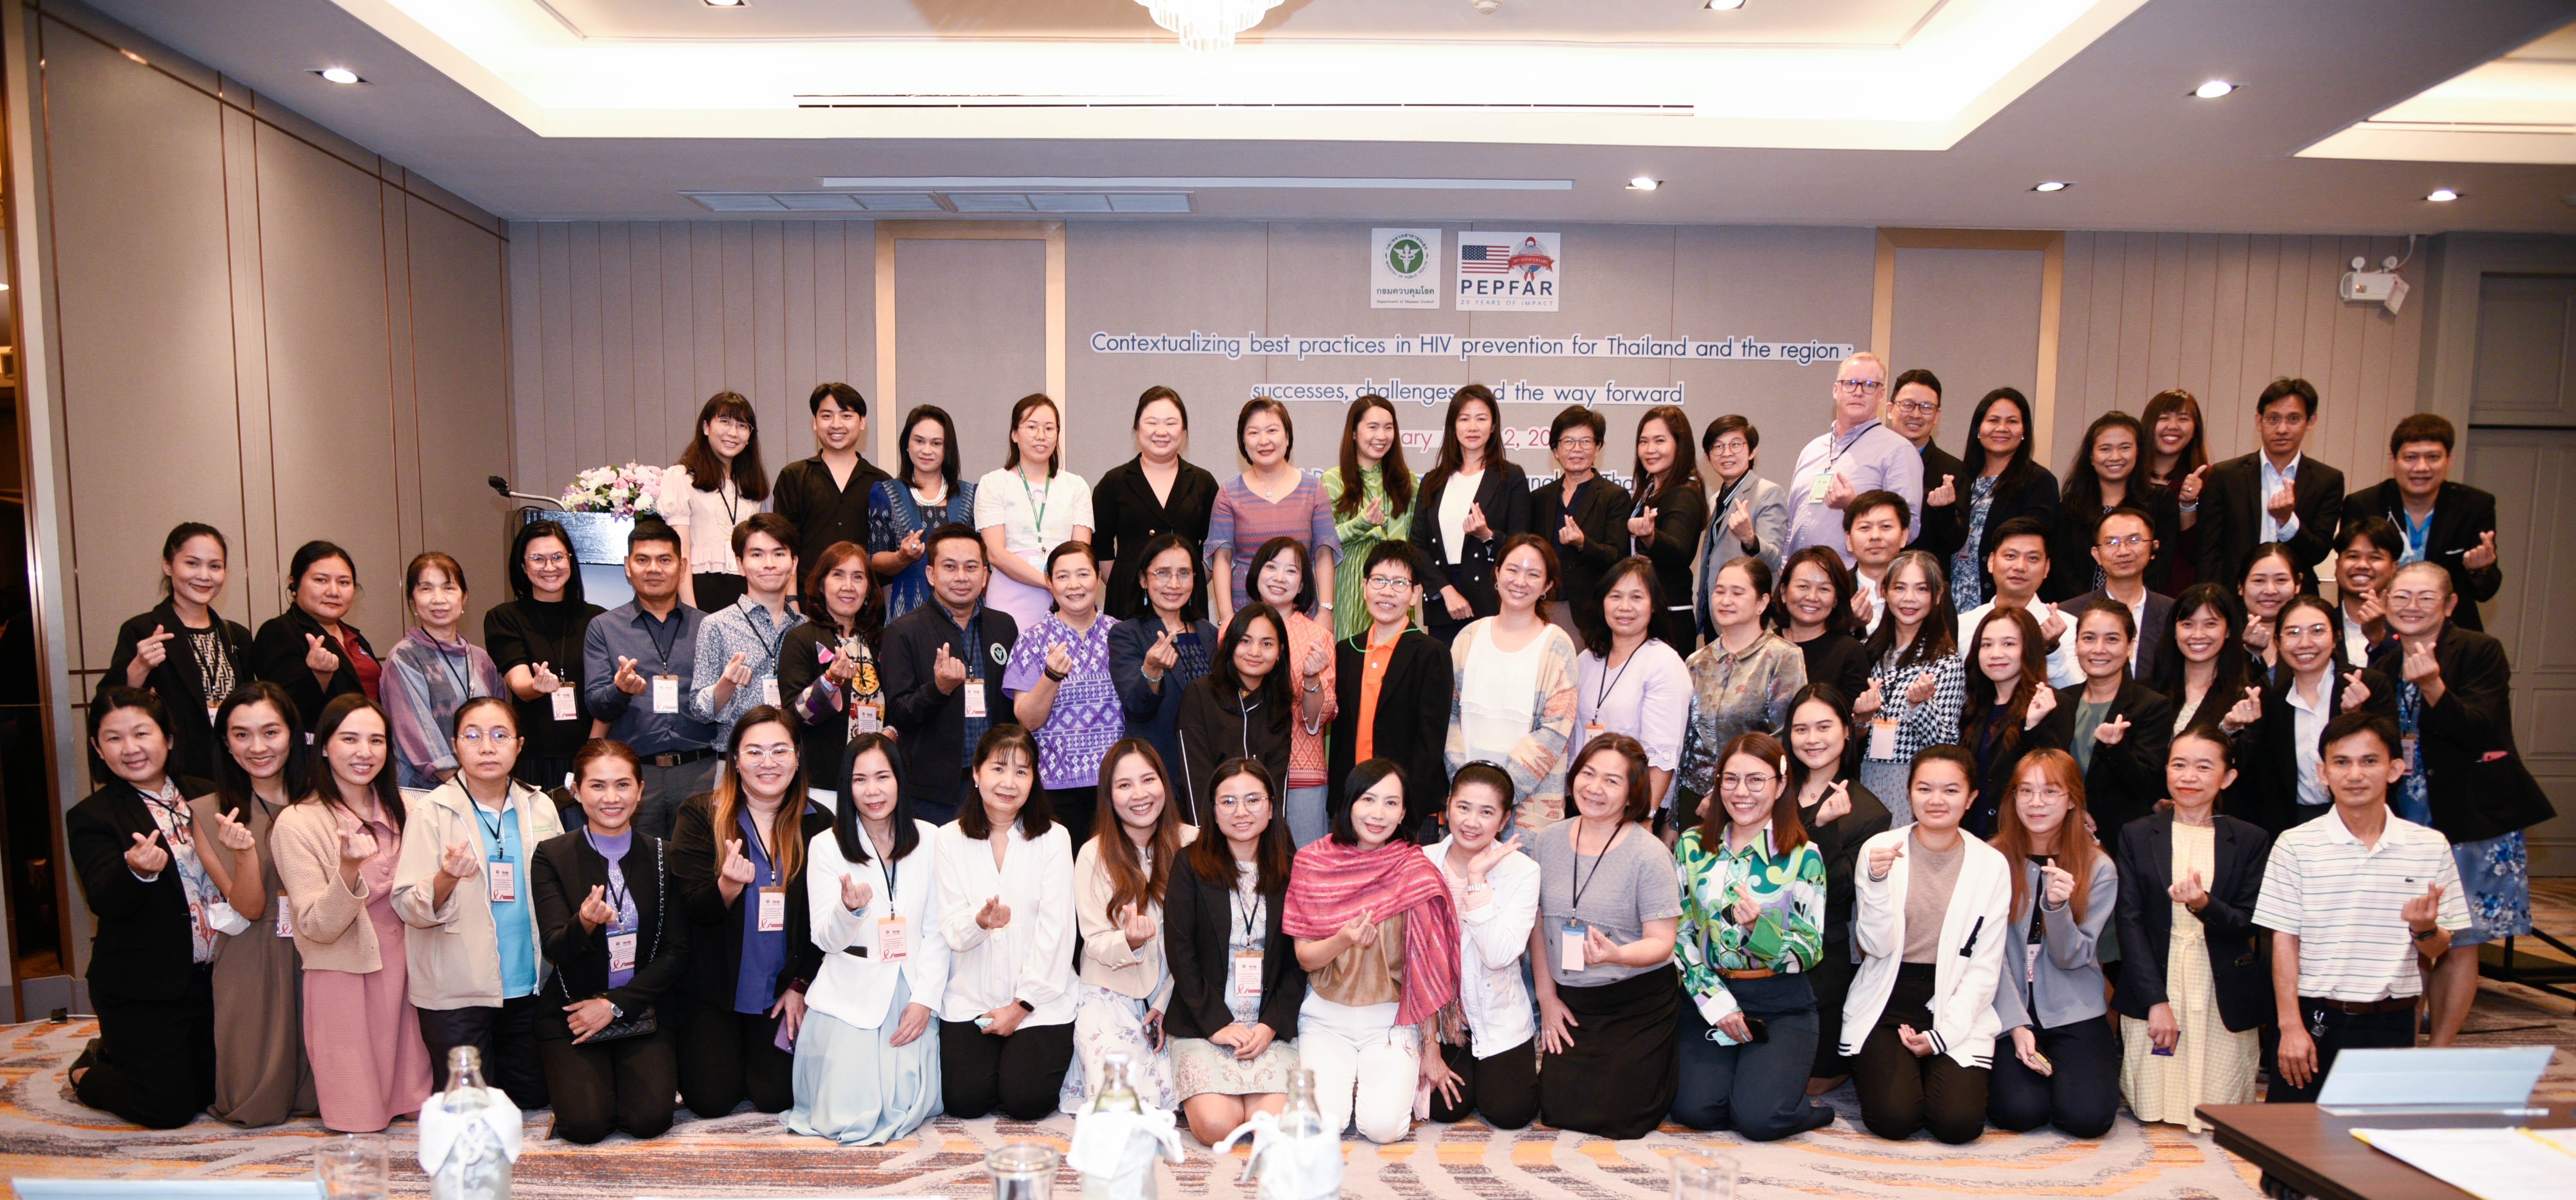 Experts gather in Thailand to discuss HIV prevention best practices